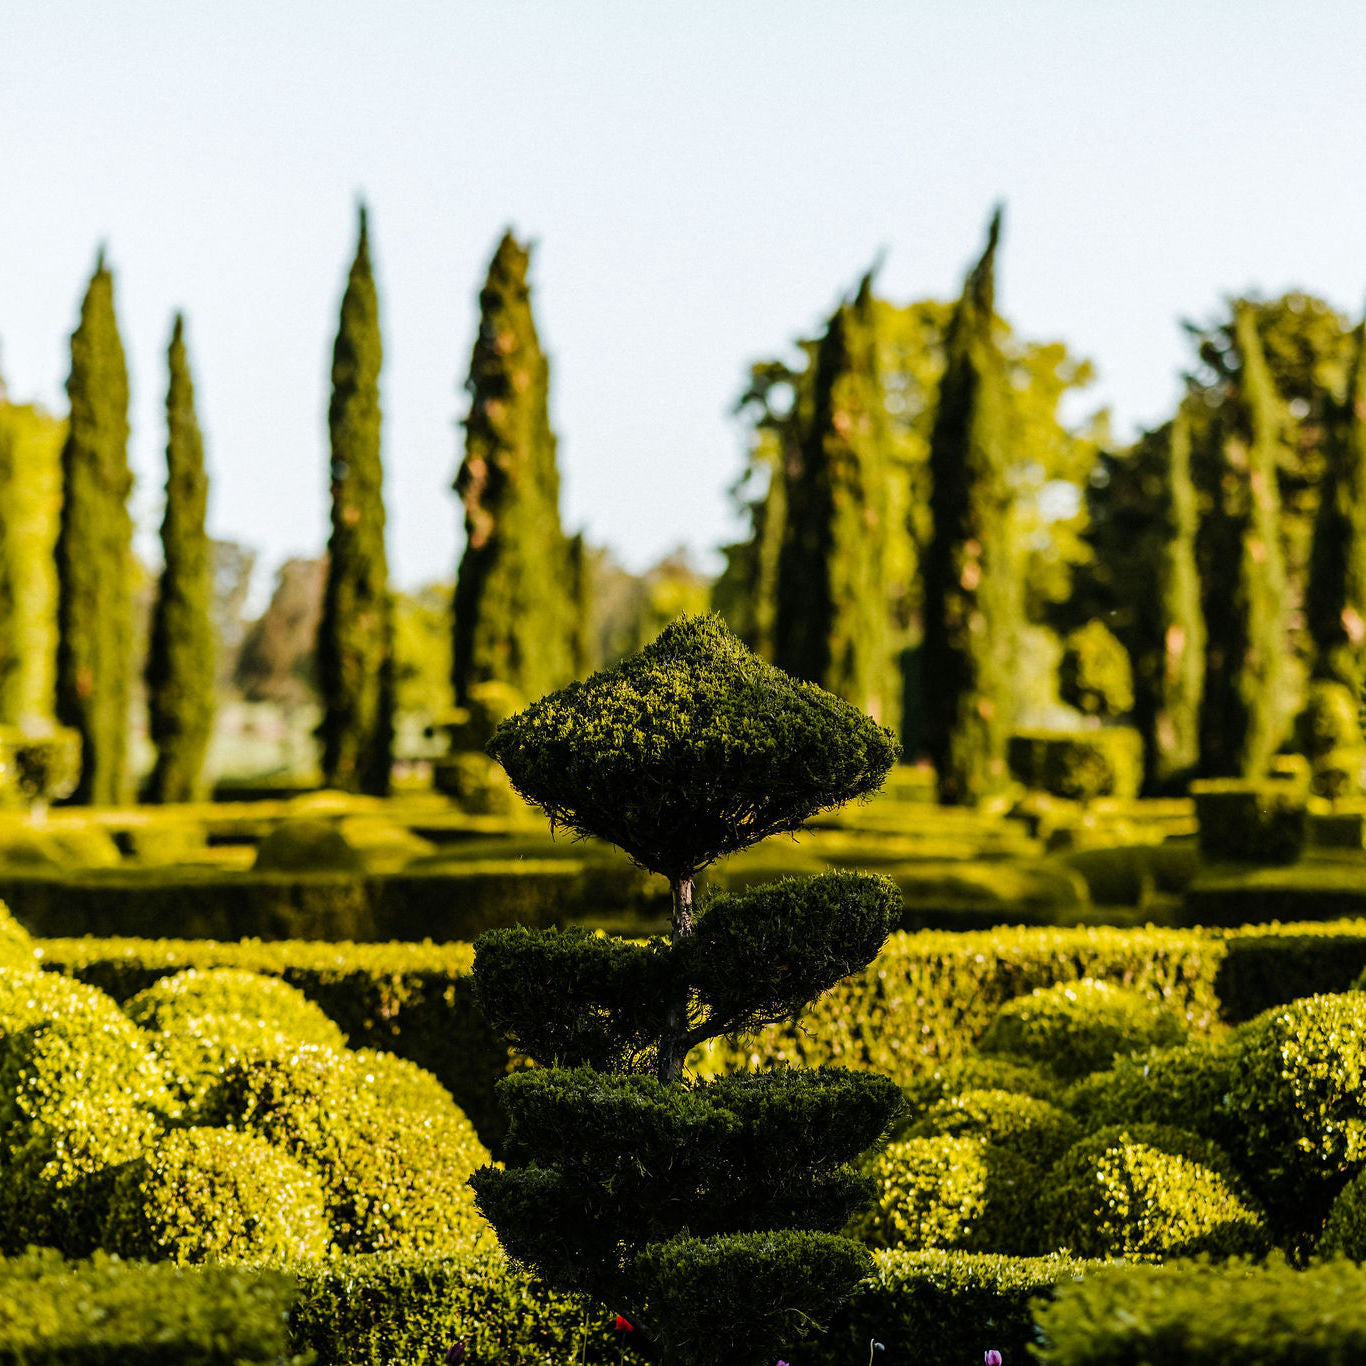 SUPER MASTERCLASS: From the Fundamentals to Advanced Techniques - The Art of Topiary and Hedging